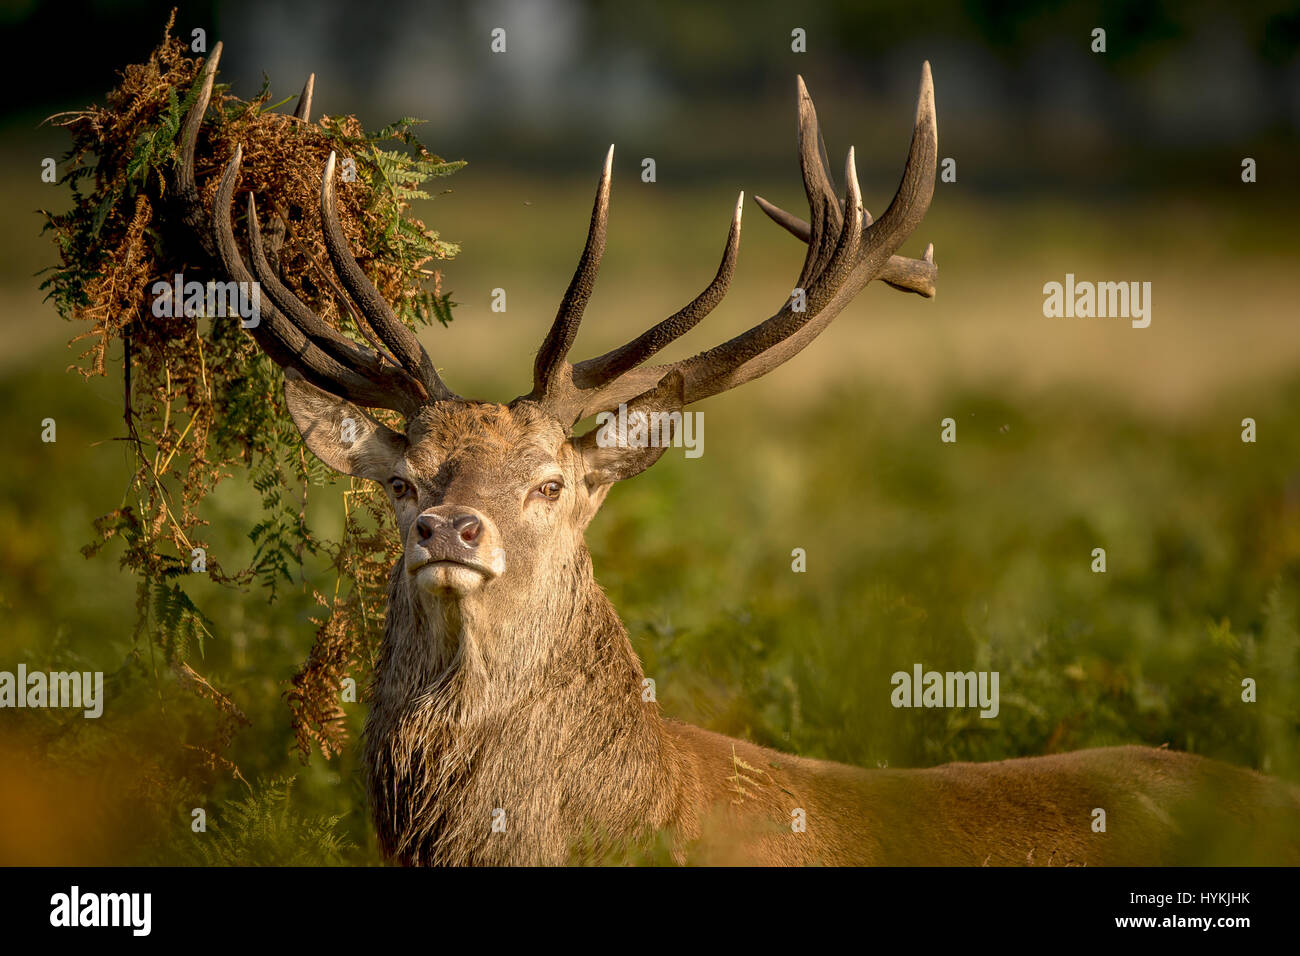 RICHMOND PARK, LONDON: HORN-TING pictures of the annual deer rut have been beautifully captured by a British graphic designer from just twenty-feet away. The photographs show action-packed rutting as well as elegant snaps of deer silhouettes at sunrise in Richmond Park, London. Other pictures show up close-up shots of expectant stags at the start of the breeding season. Graphic designer Mark Bridger (47) got up at 5am to travel from his home in Kent to the deer-packed location just yards from the busy streets of London and spent four-and-a-half hours capturing these exciting shots. Stock Photo